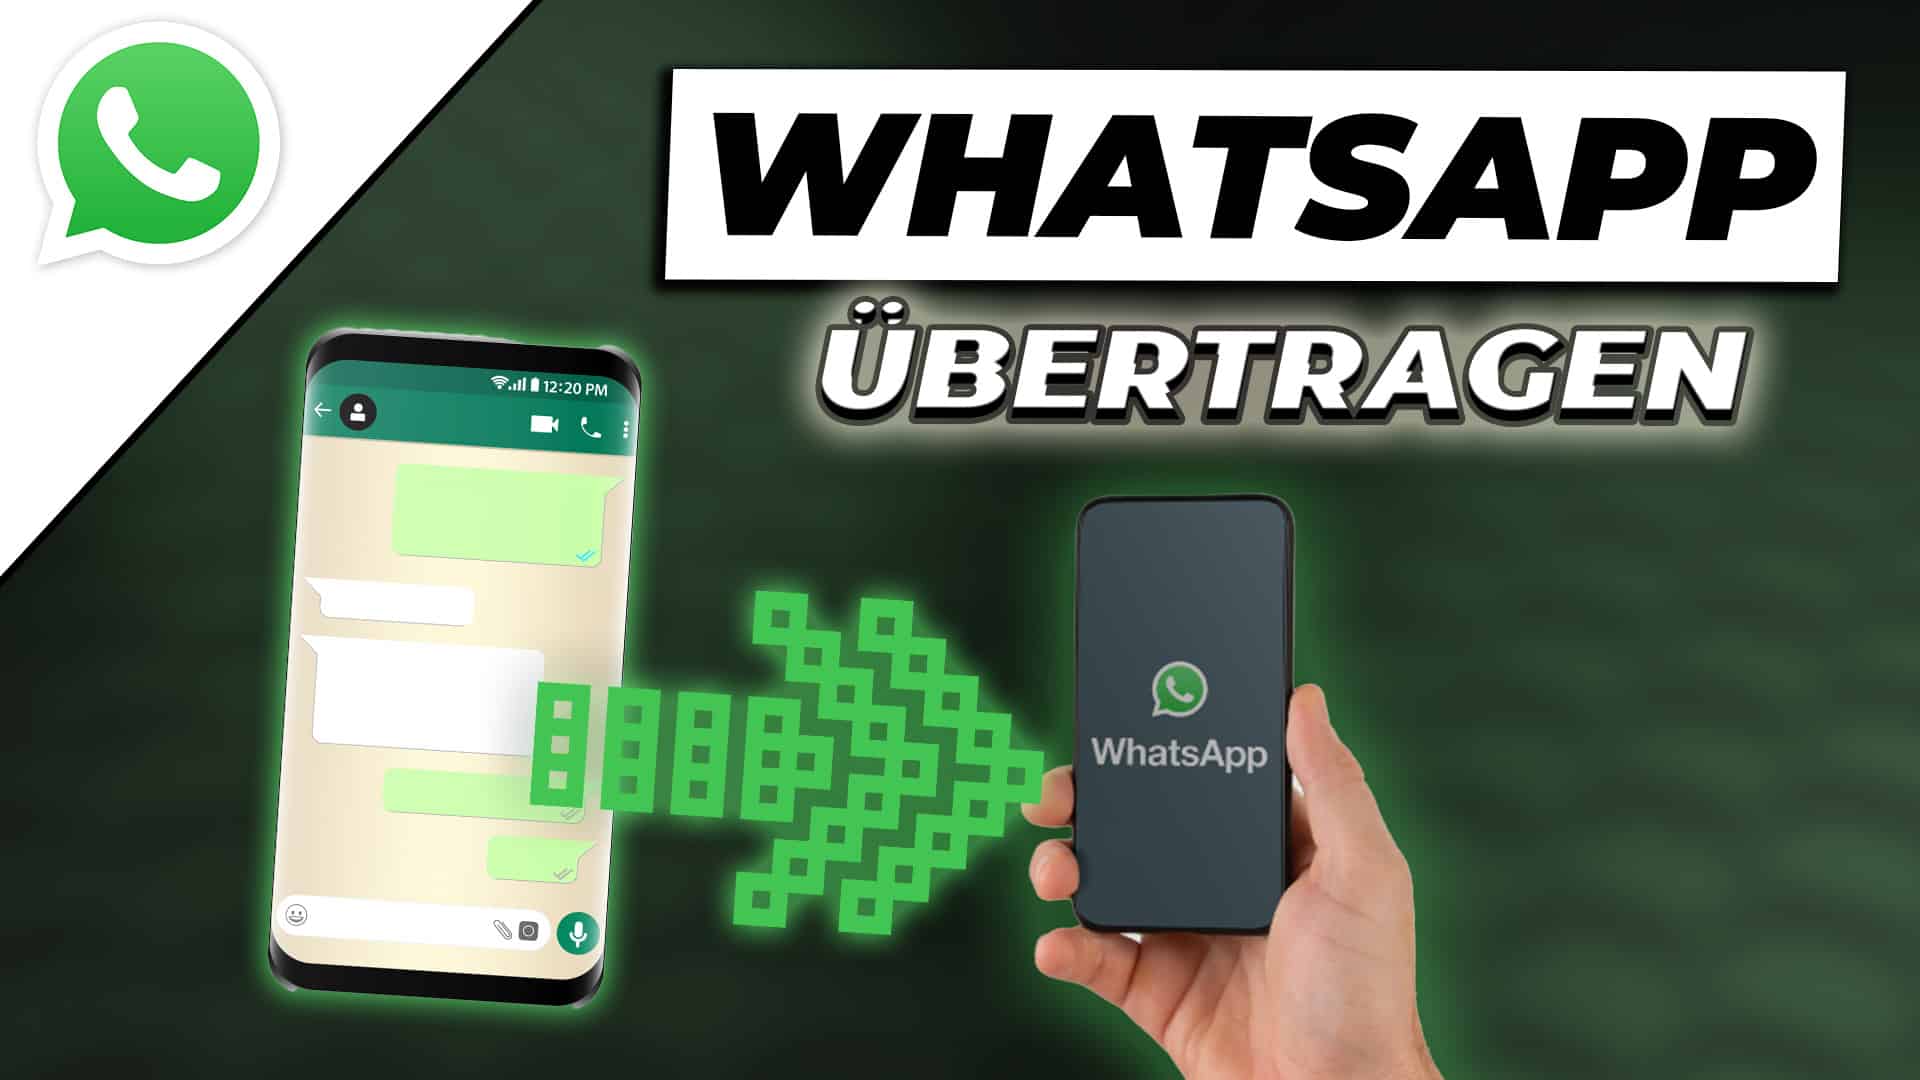 Transfer WhatsApp to a new cell phone – here’s how